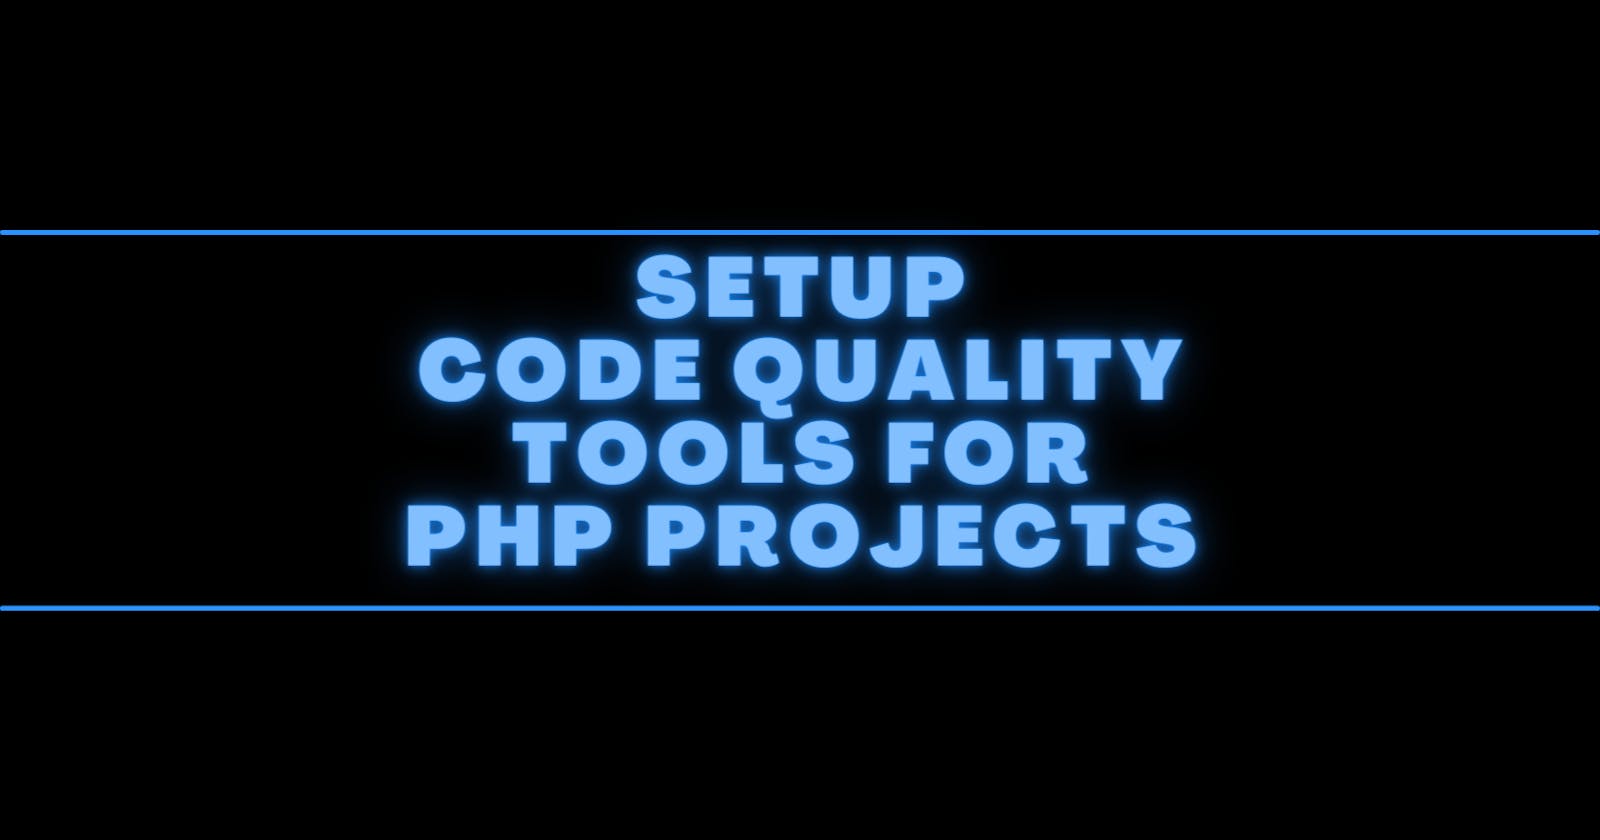 Setup Code Quality tools for PHP projects